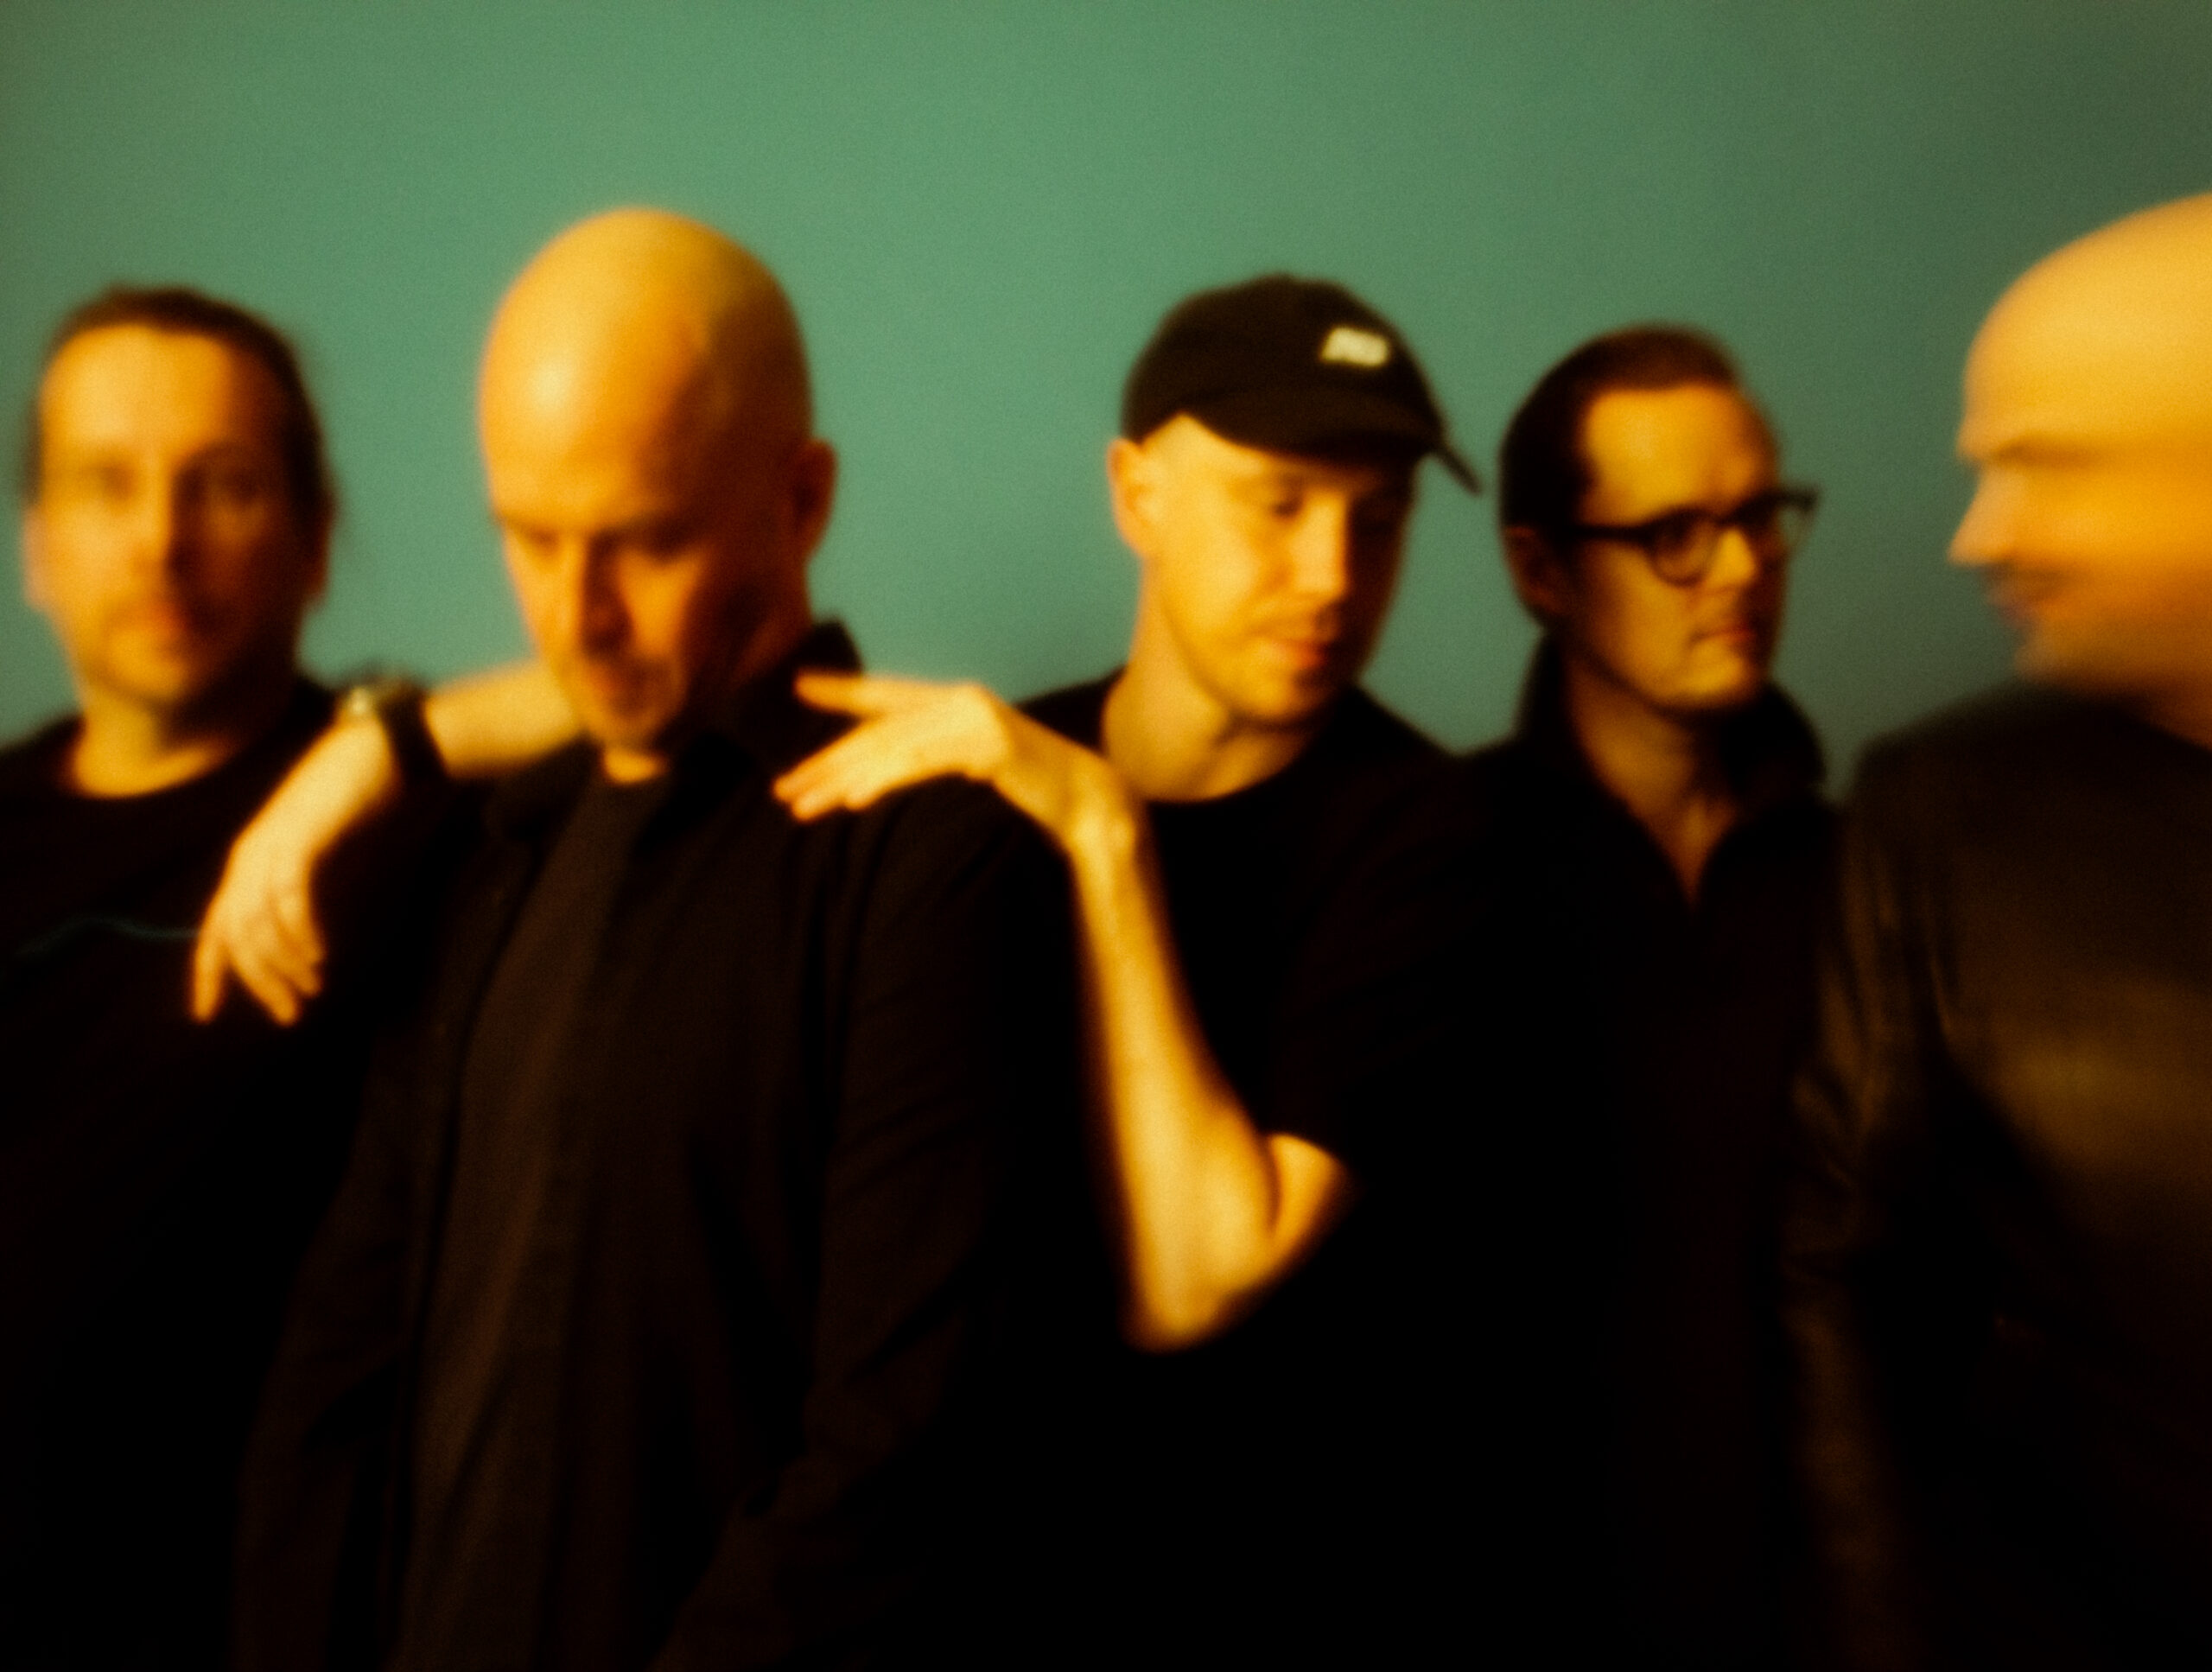 Five men dressed in black in front of a green background.